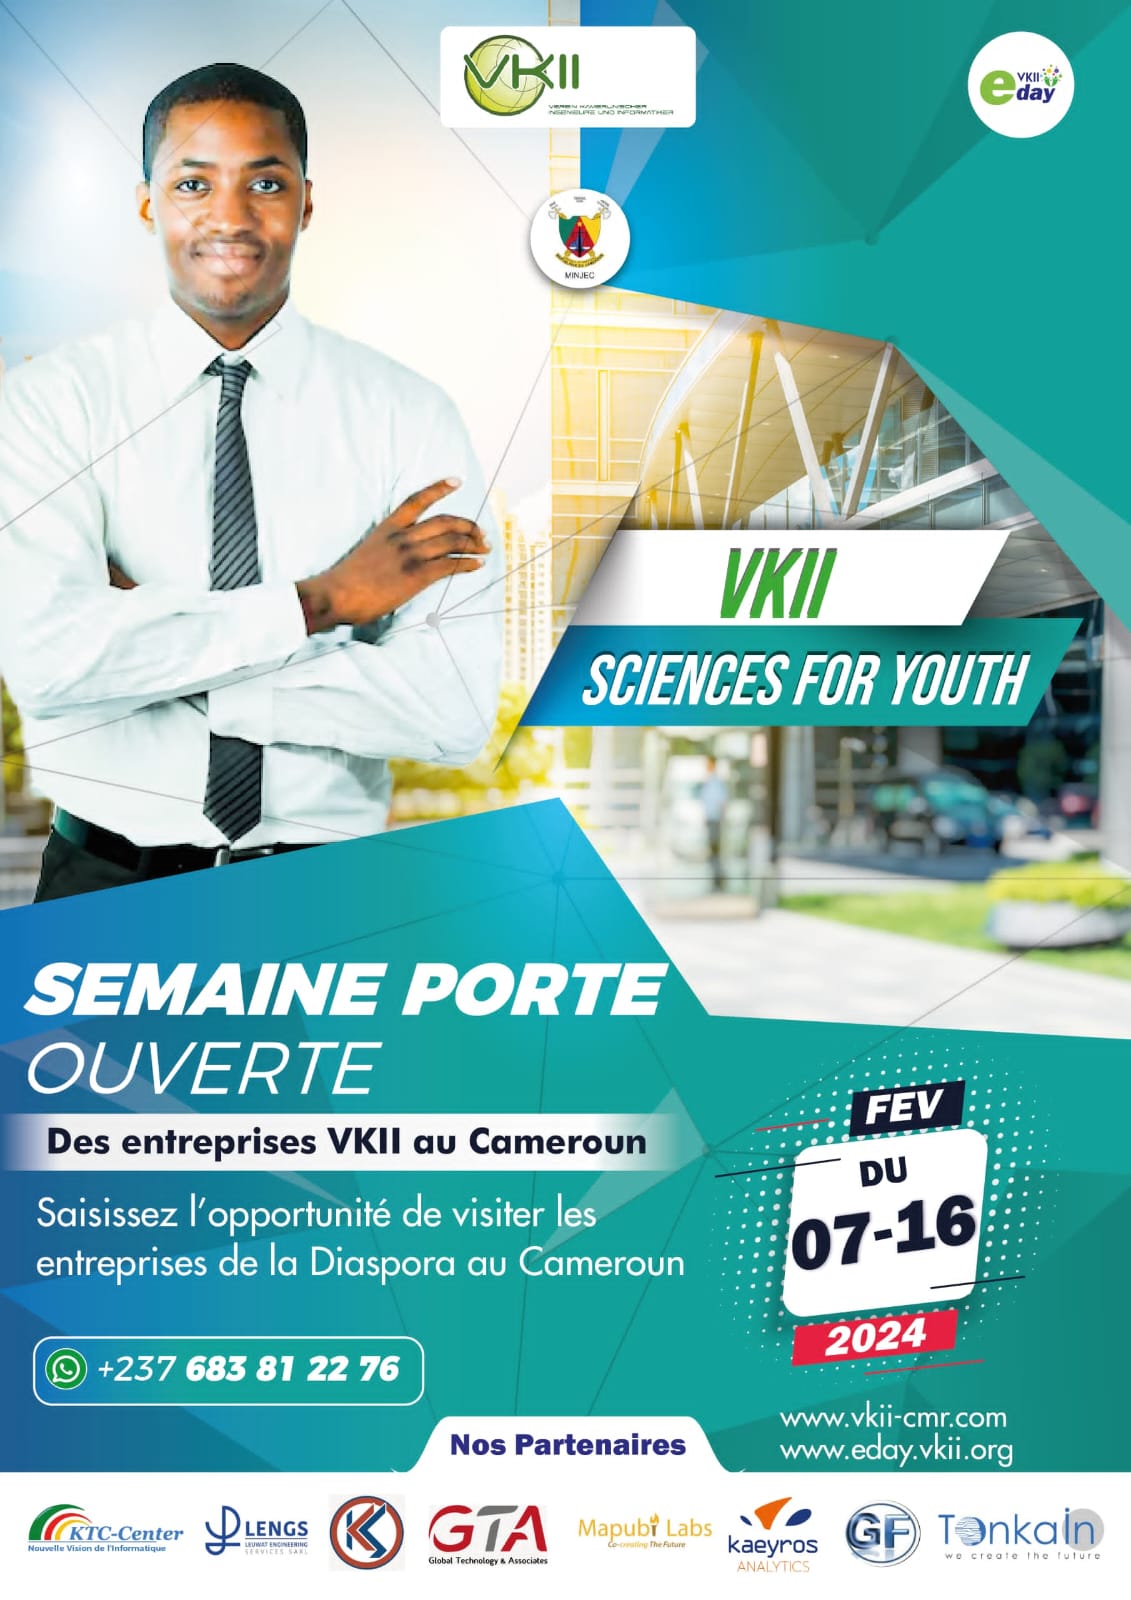 VKII Sciences for youth 2024